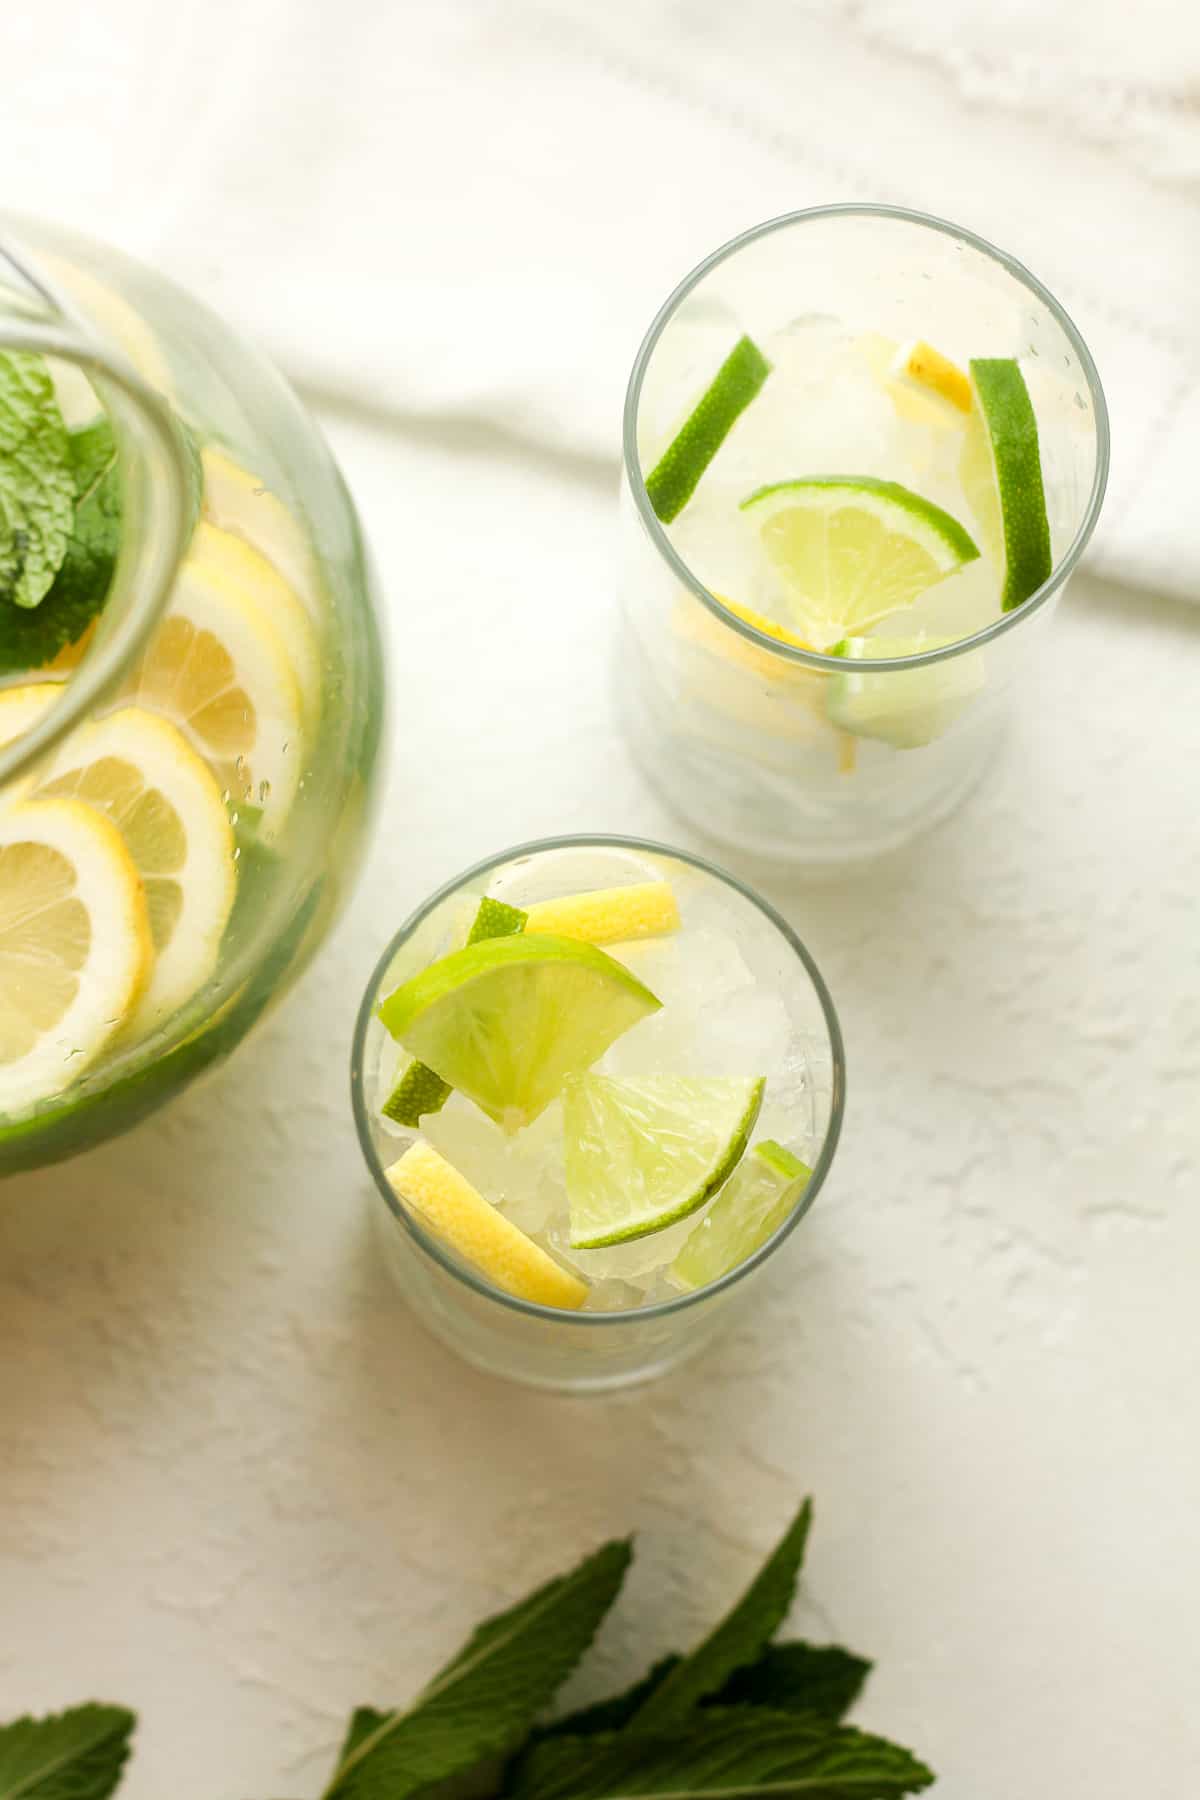 Overhead shot of two glasses with lemon and lime slices plus grated ice.